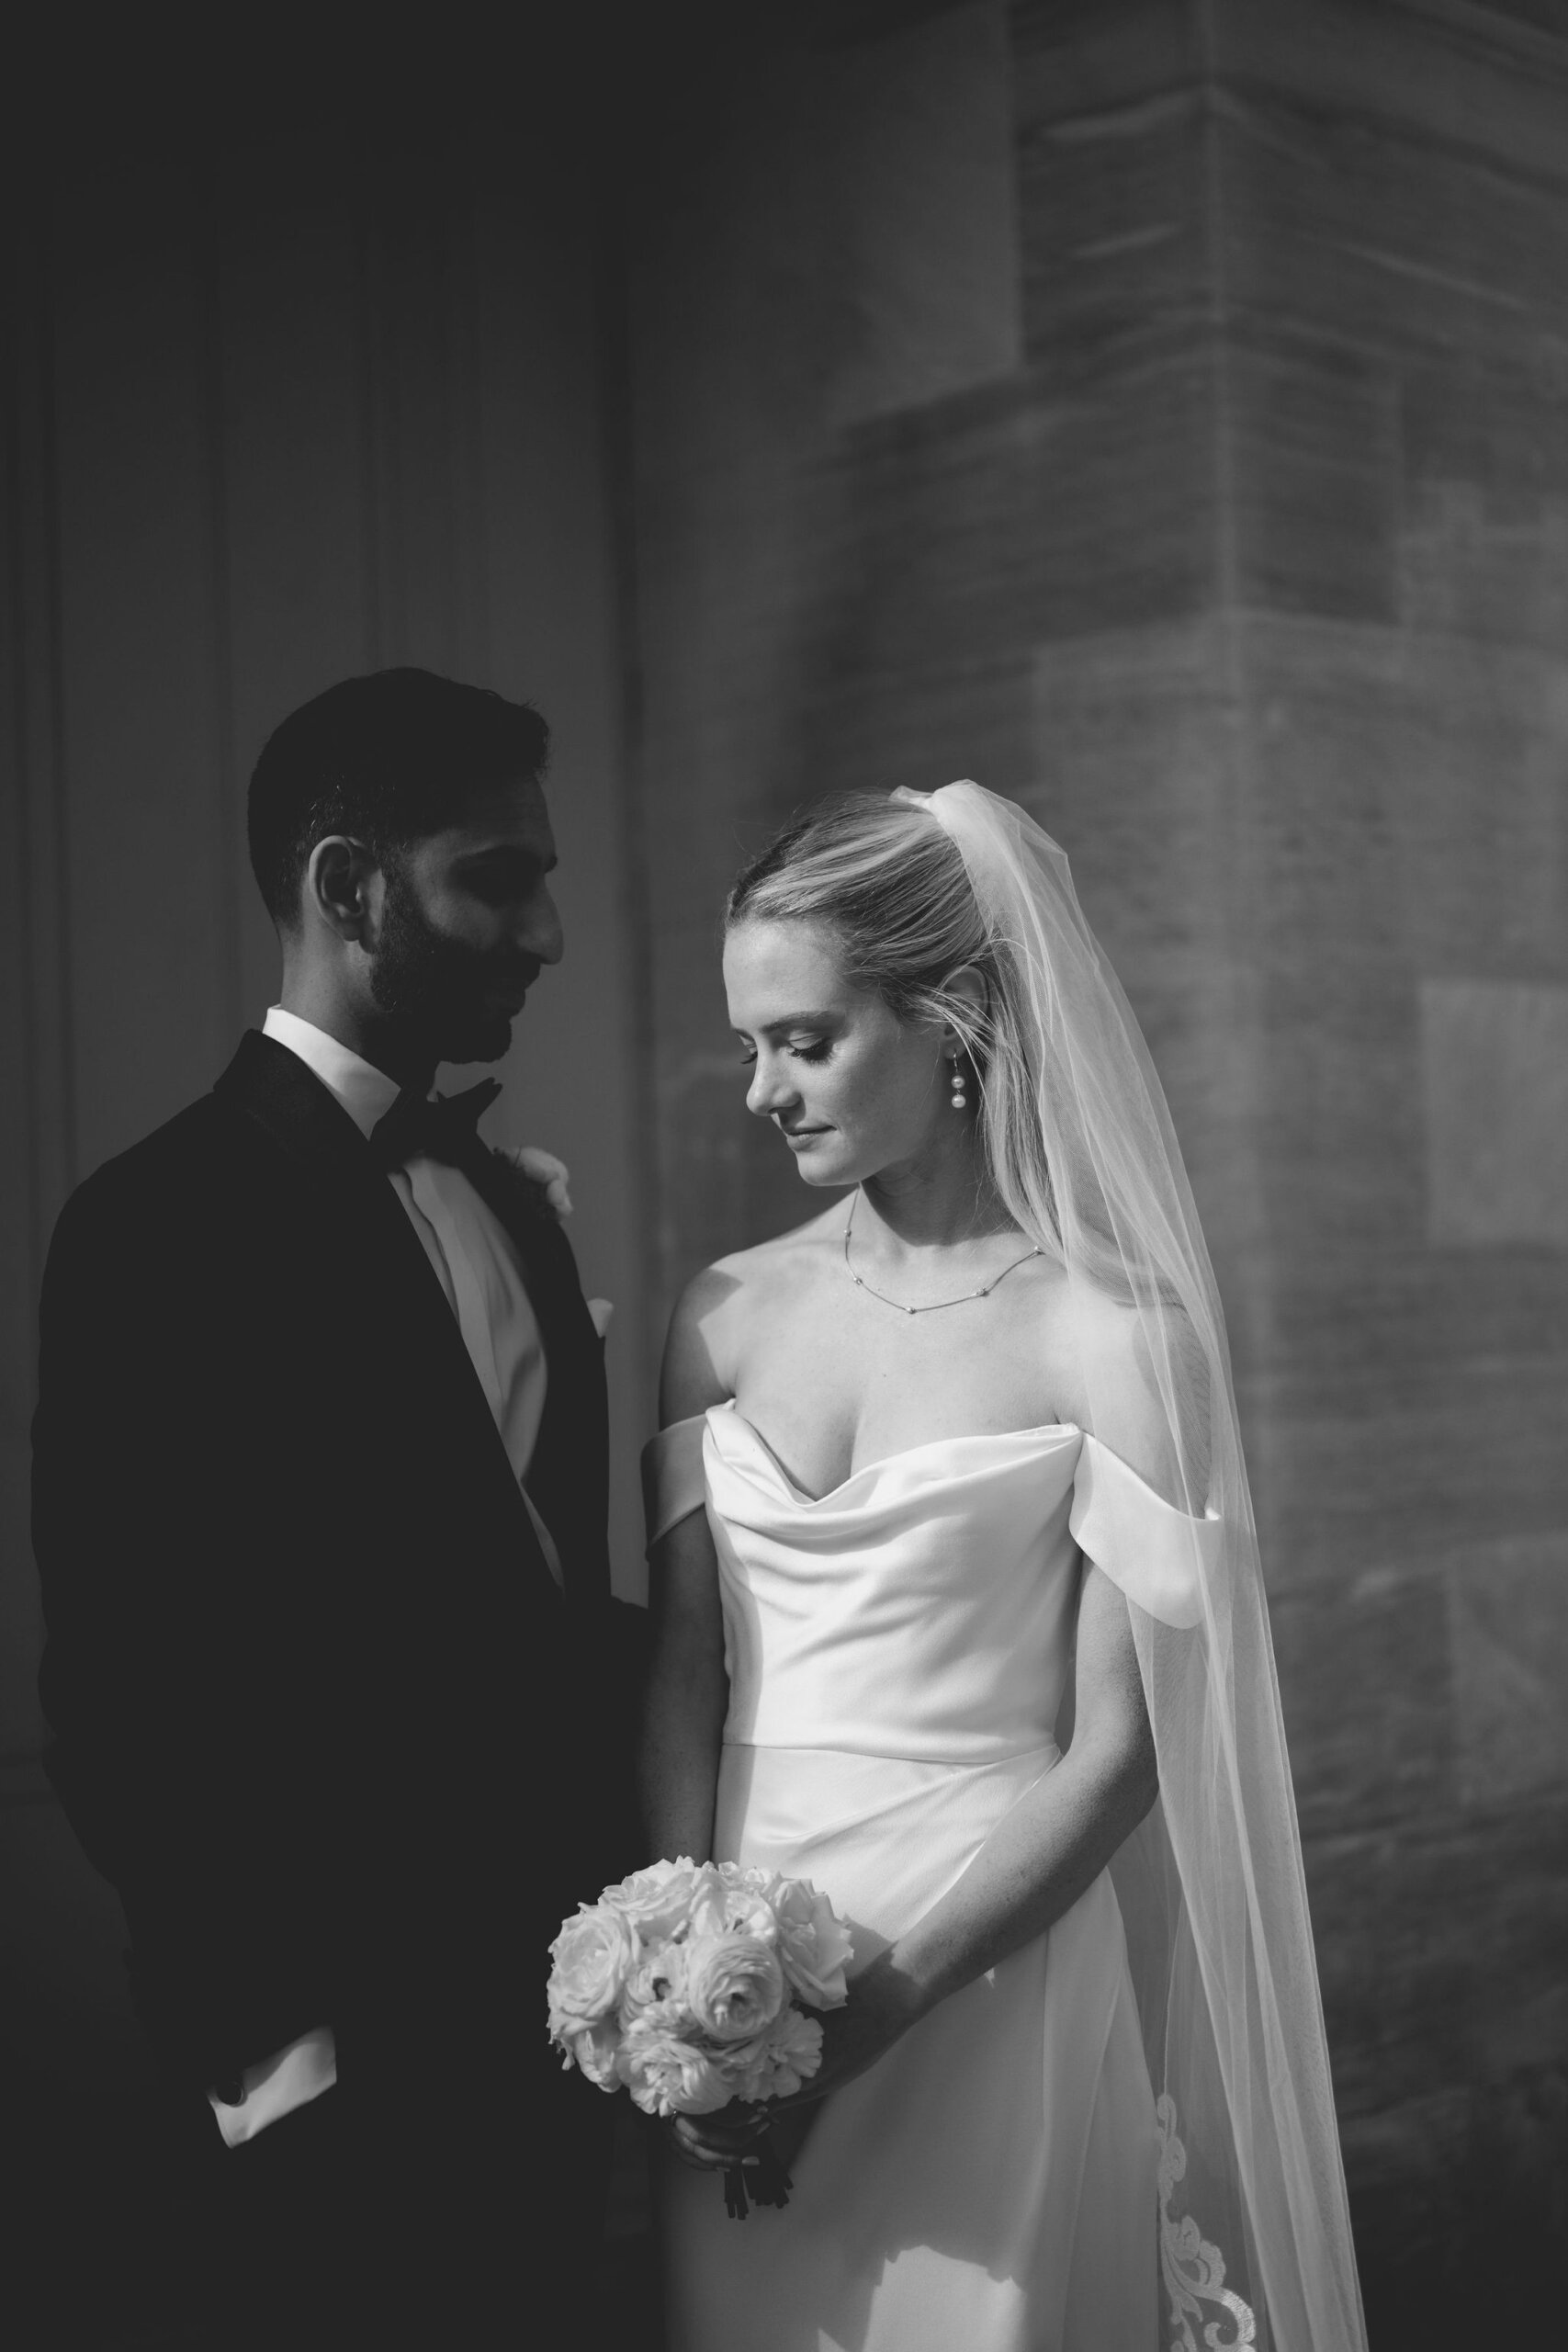 Bride and groom portrait at the merchant building in Philadelphia, PA